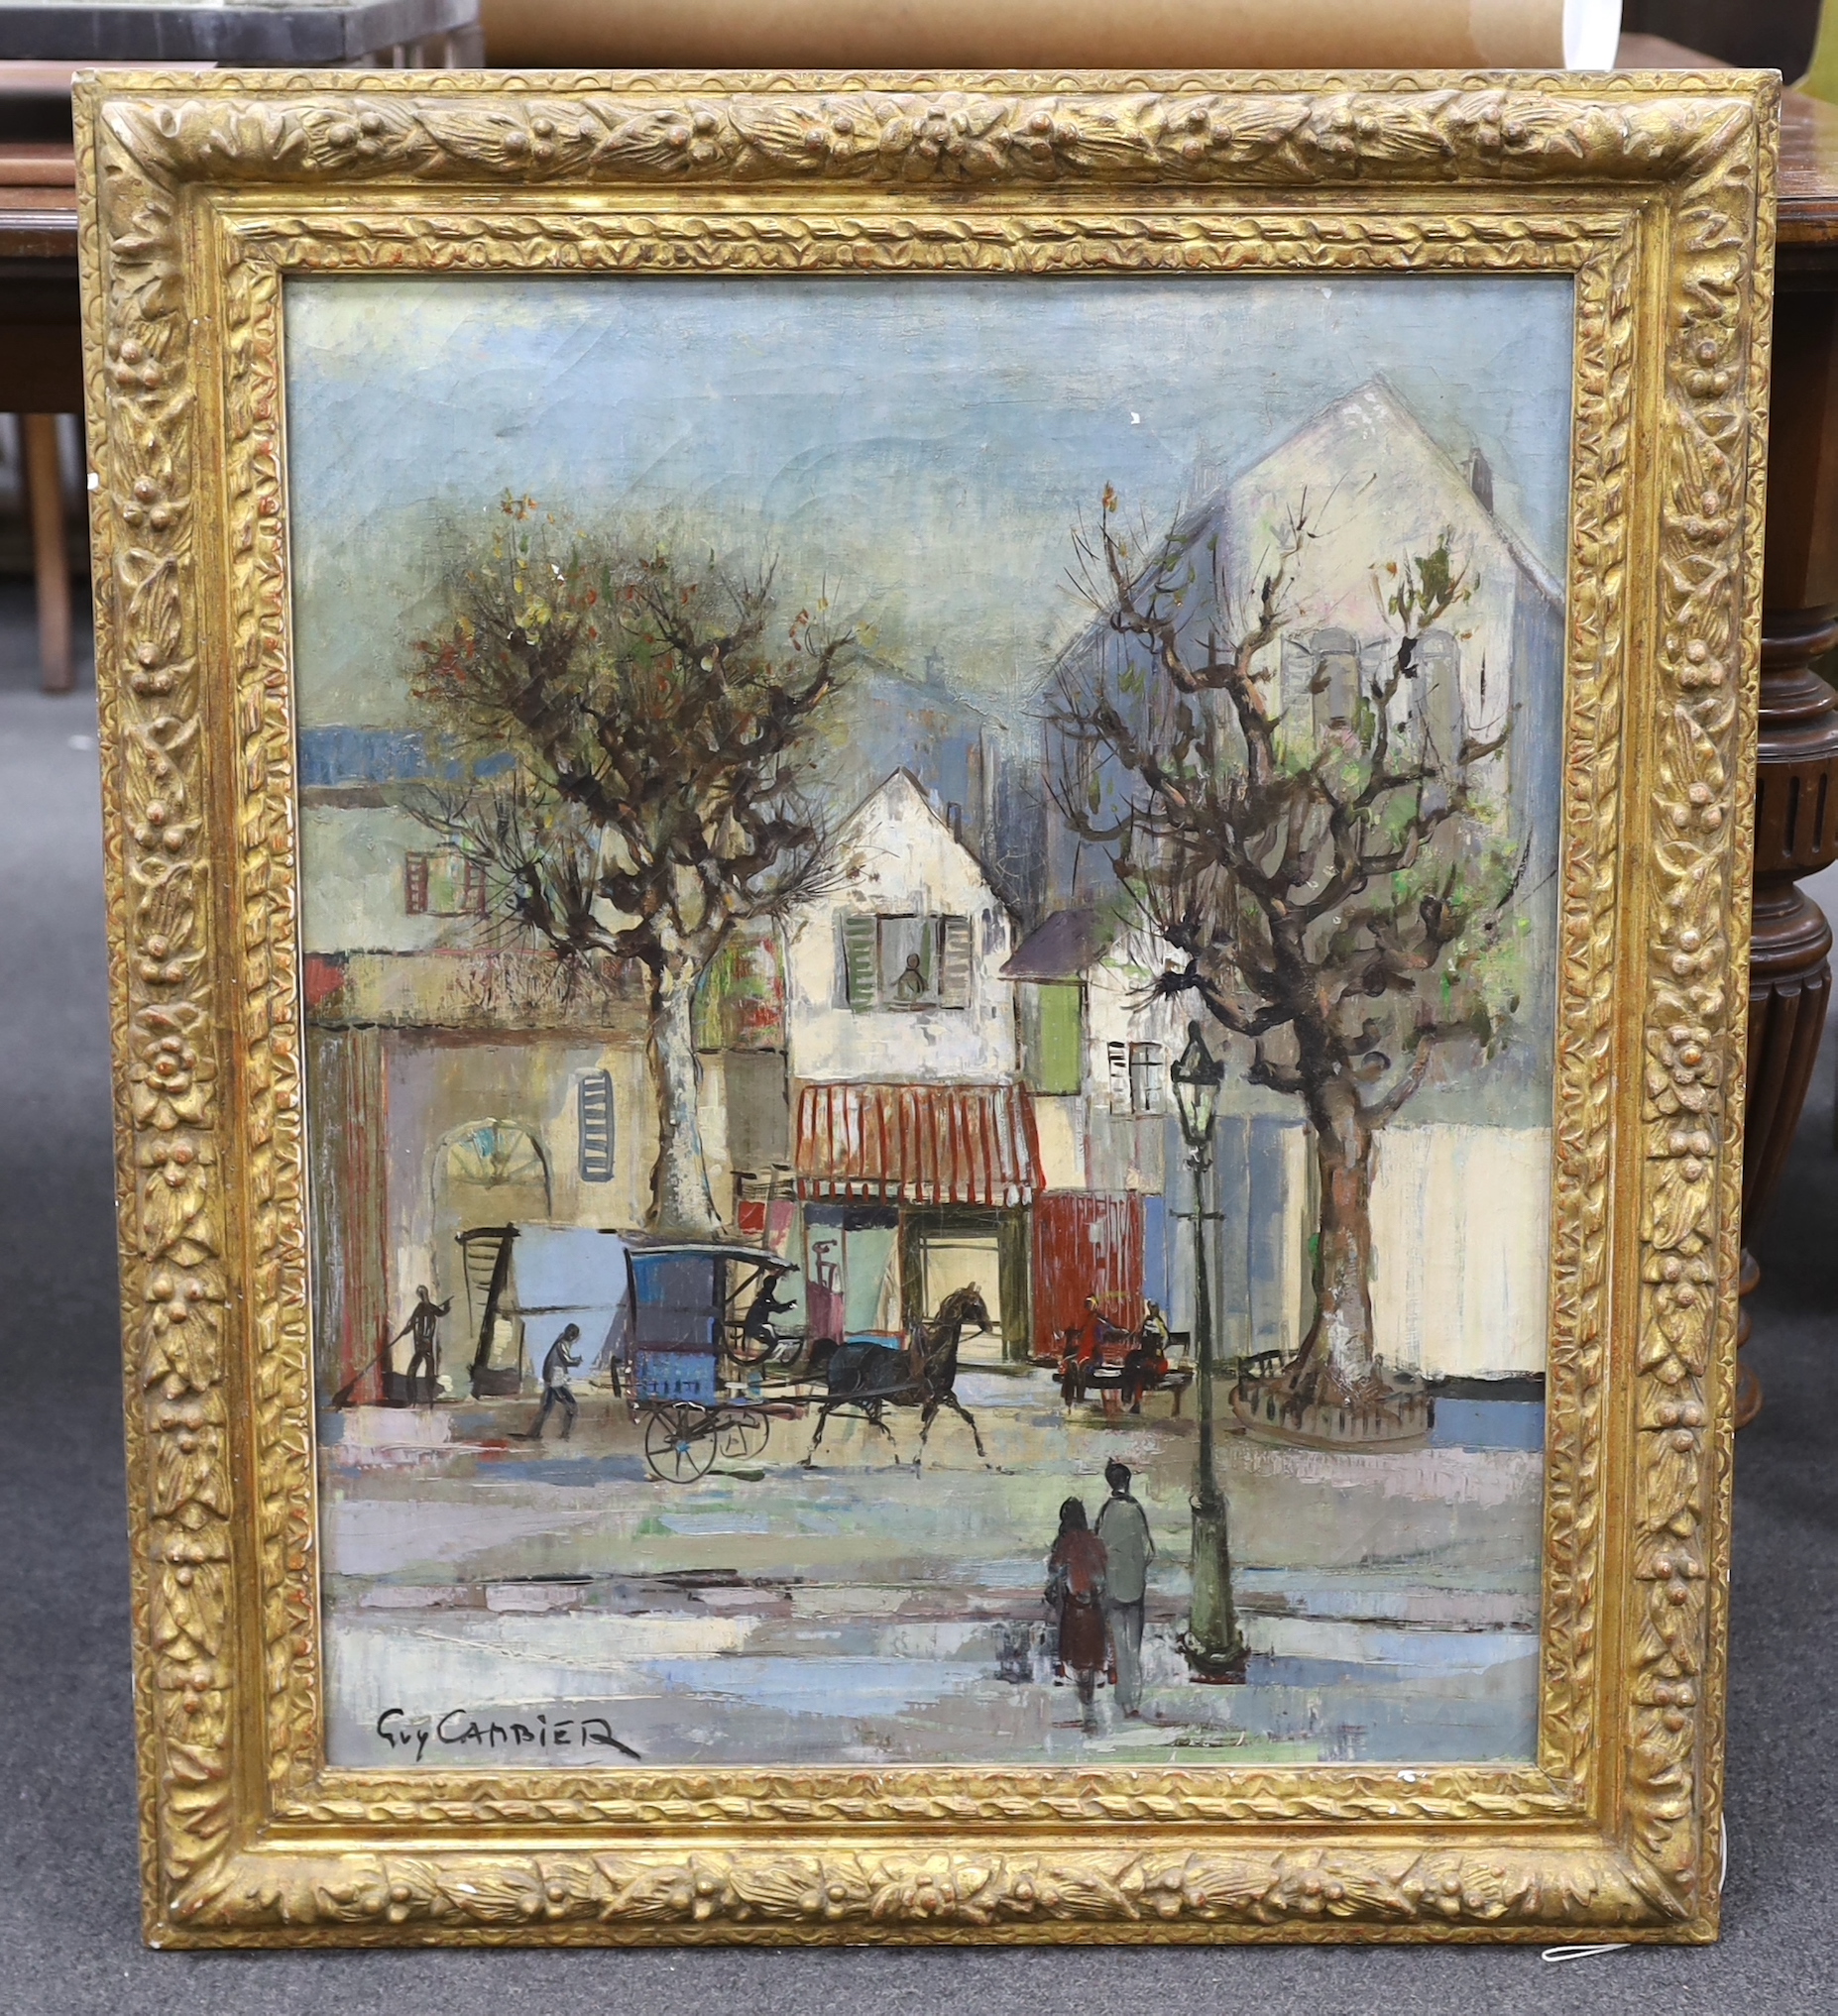 Guy Cambier (1923-2008), oil on canvas, Street scene with horse and carriage, signed, 63 x 52cm